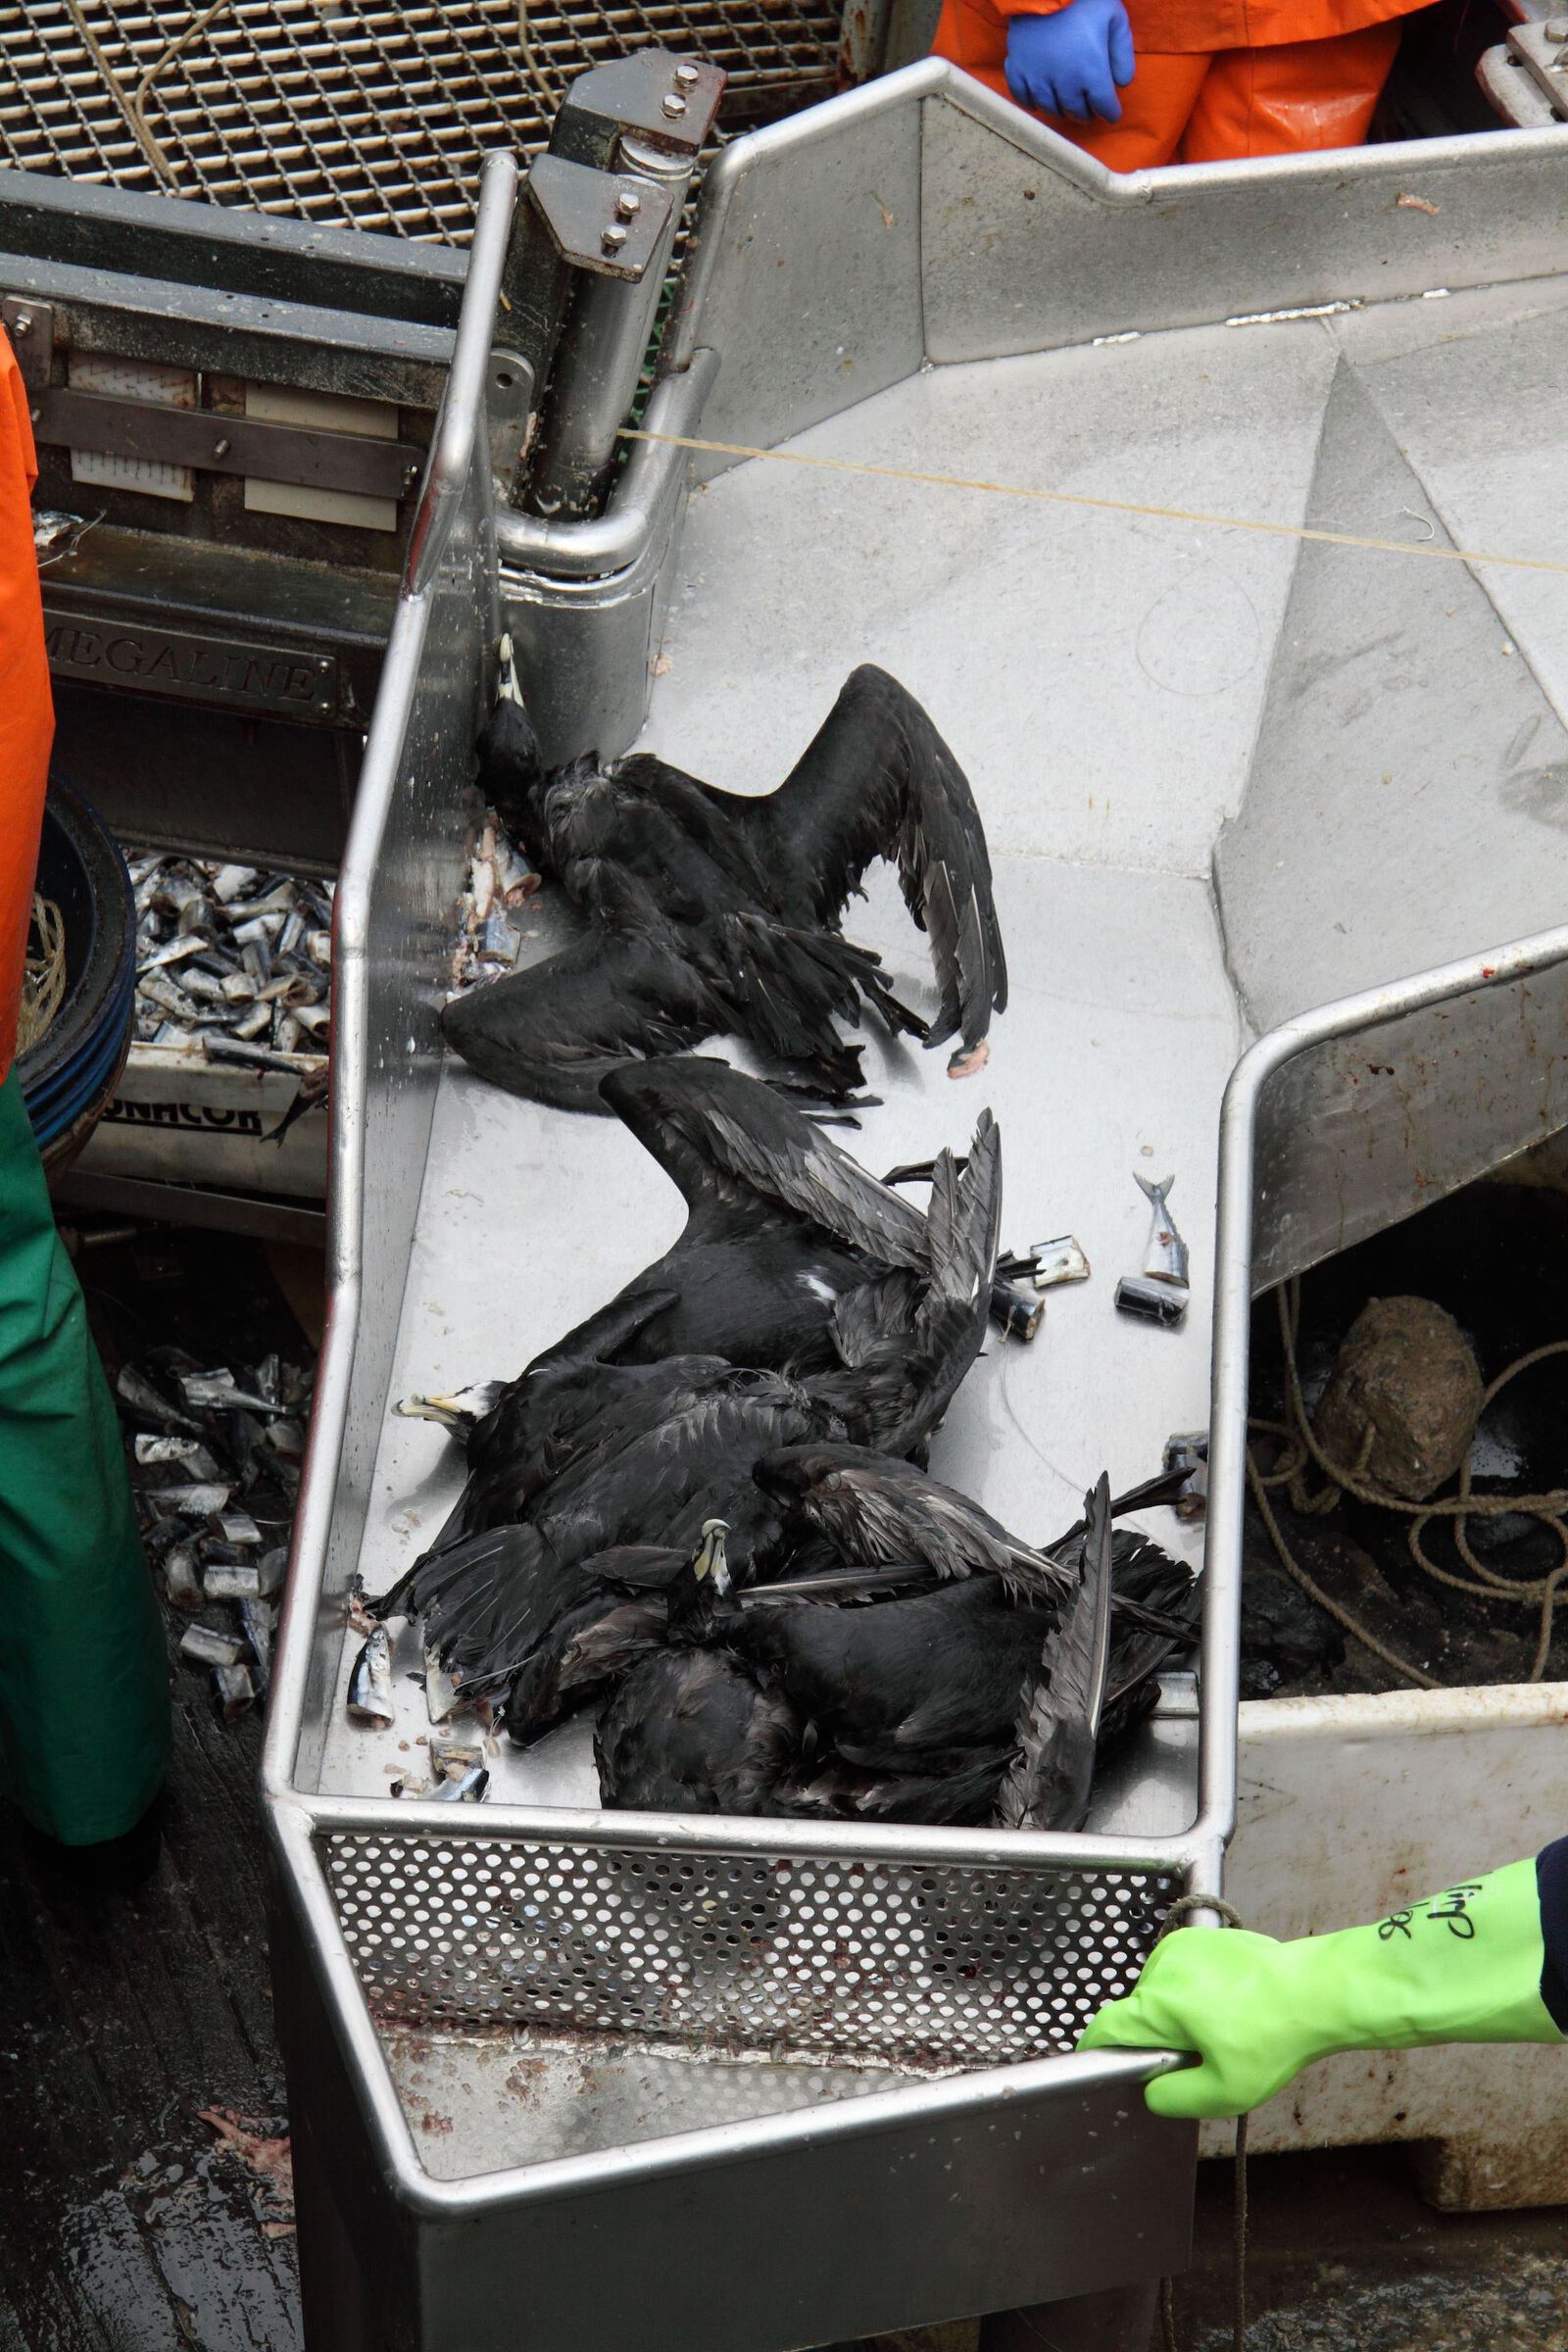 A pile of dead petrels in a metal container.